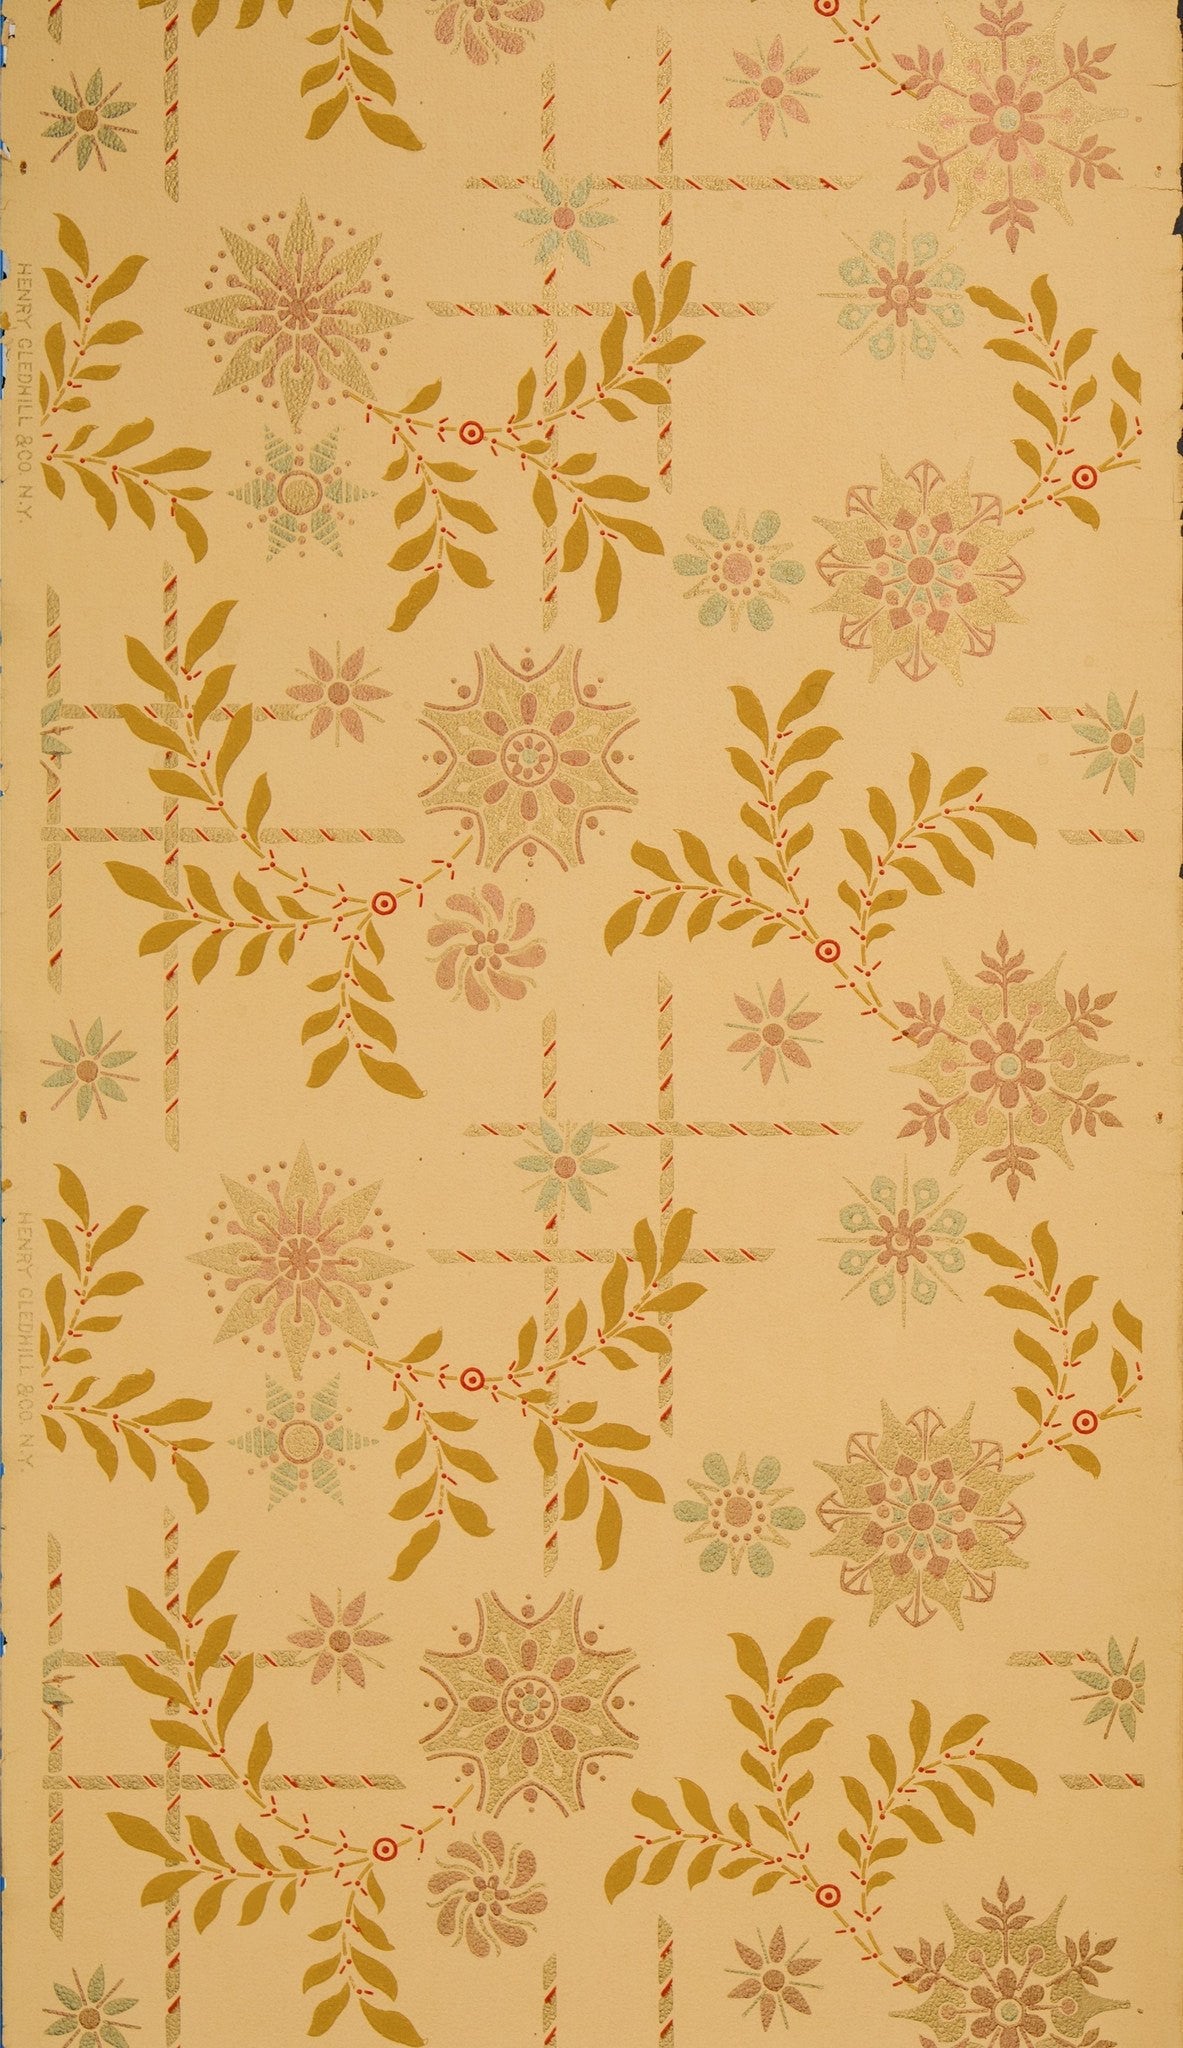 Conventionalized Florets with Leaves - Antique Wallpaper Remnant